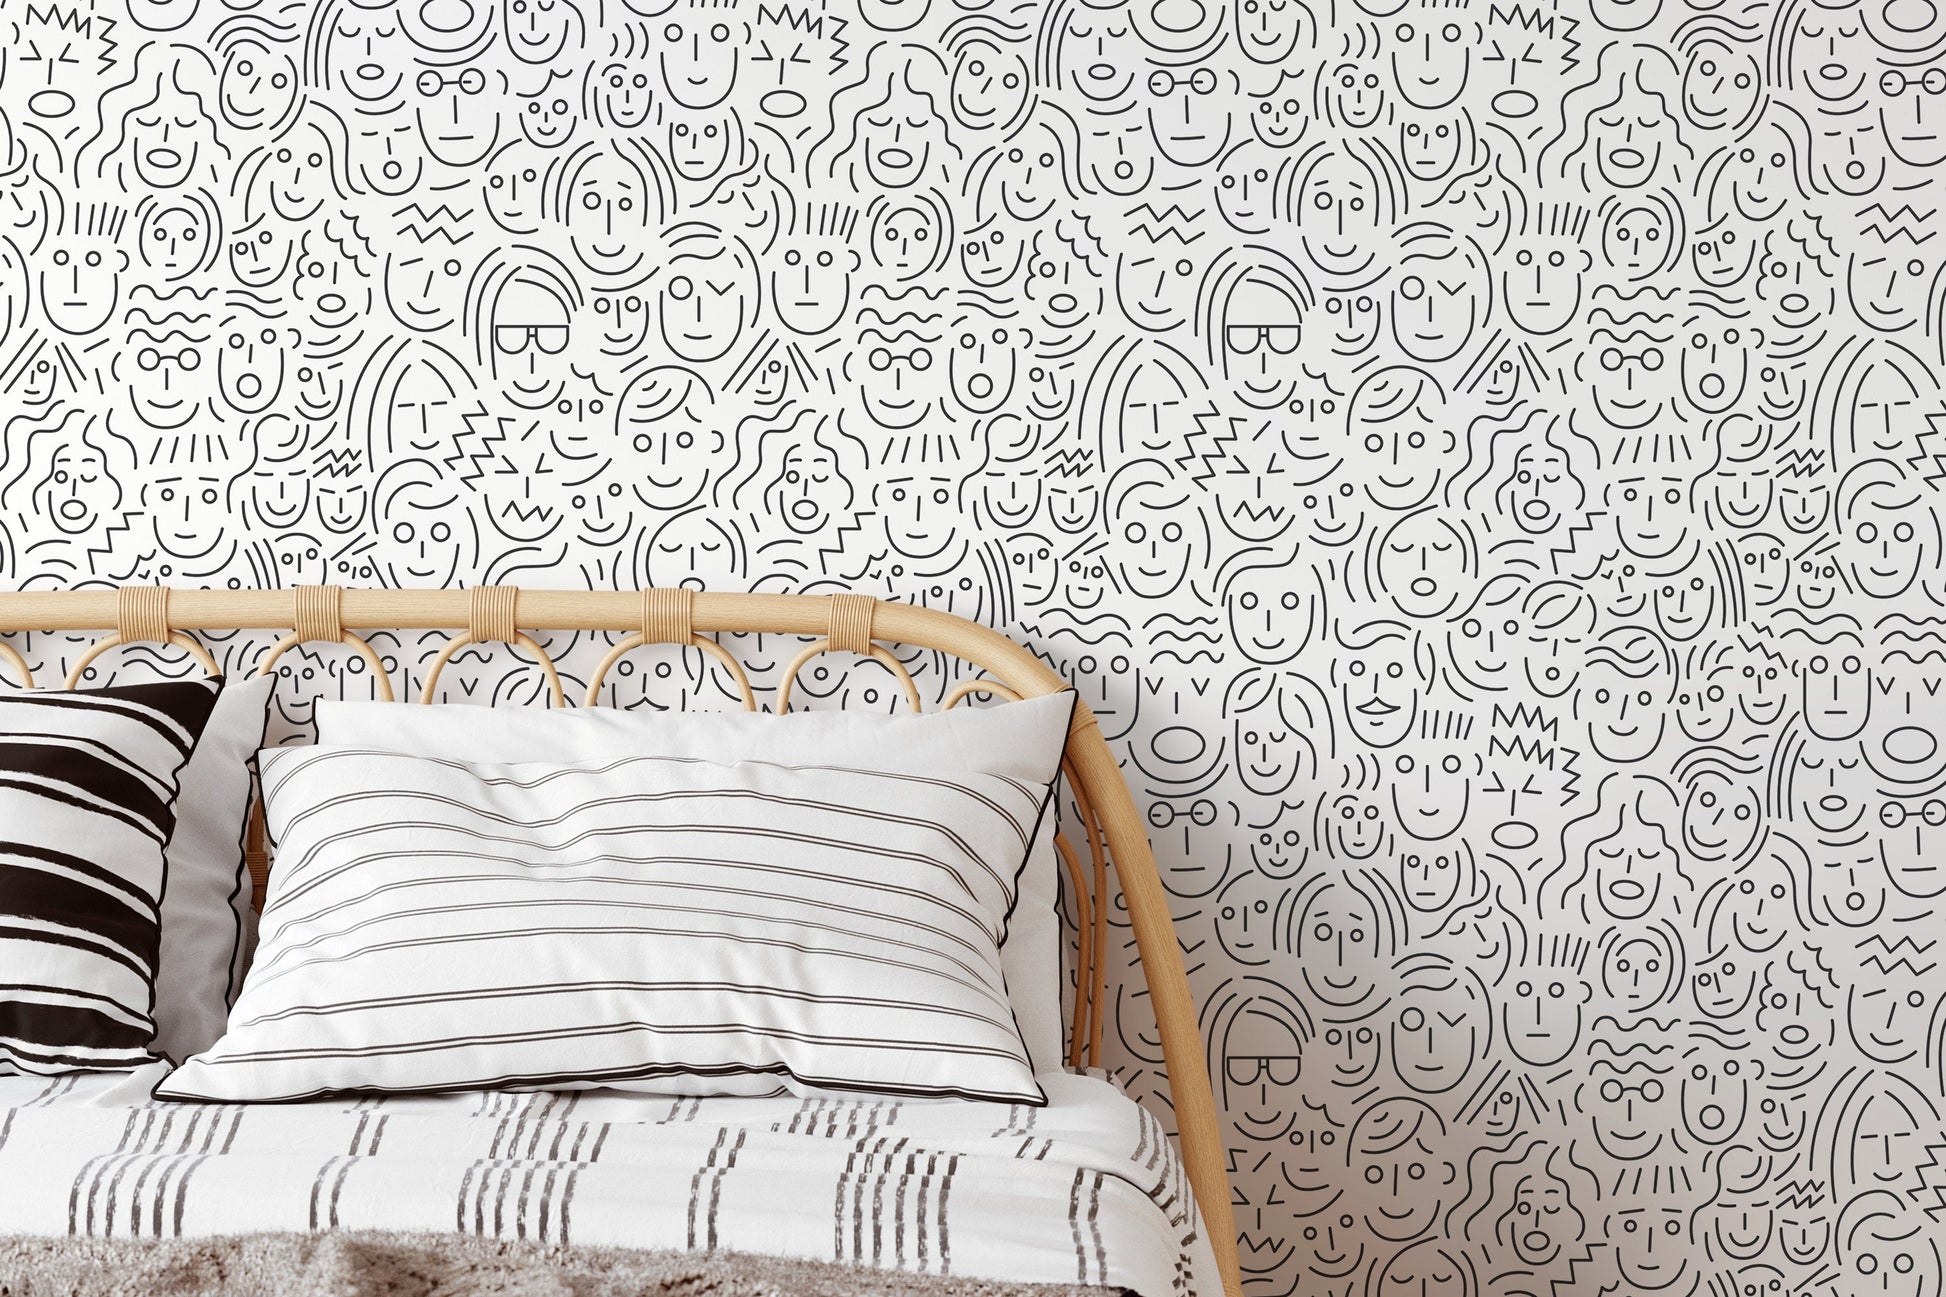 Faces Wallpaper - Removable Wallpaper Peel and Stick Wallpaper Wall Paper Wall - B280